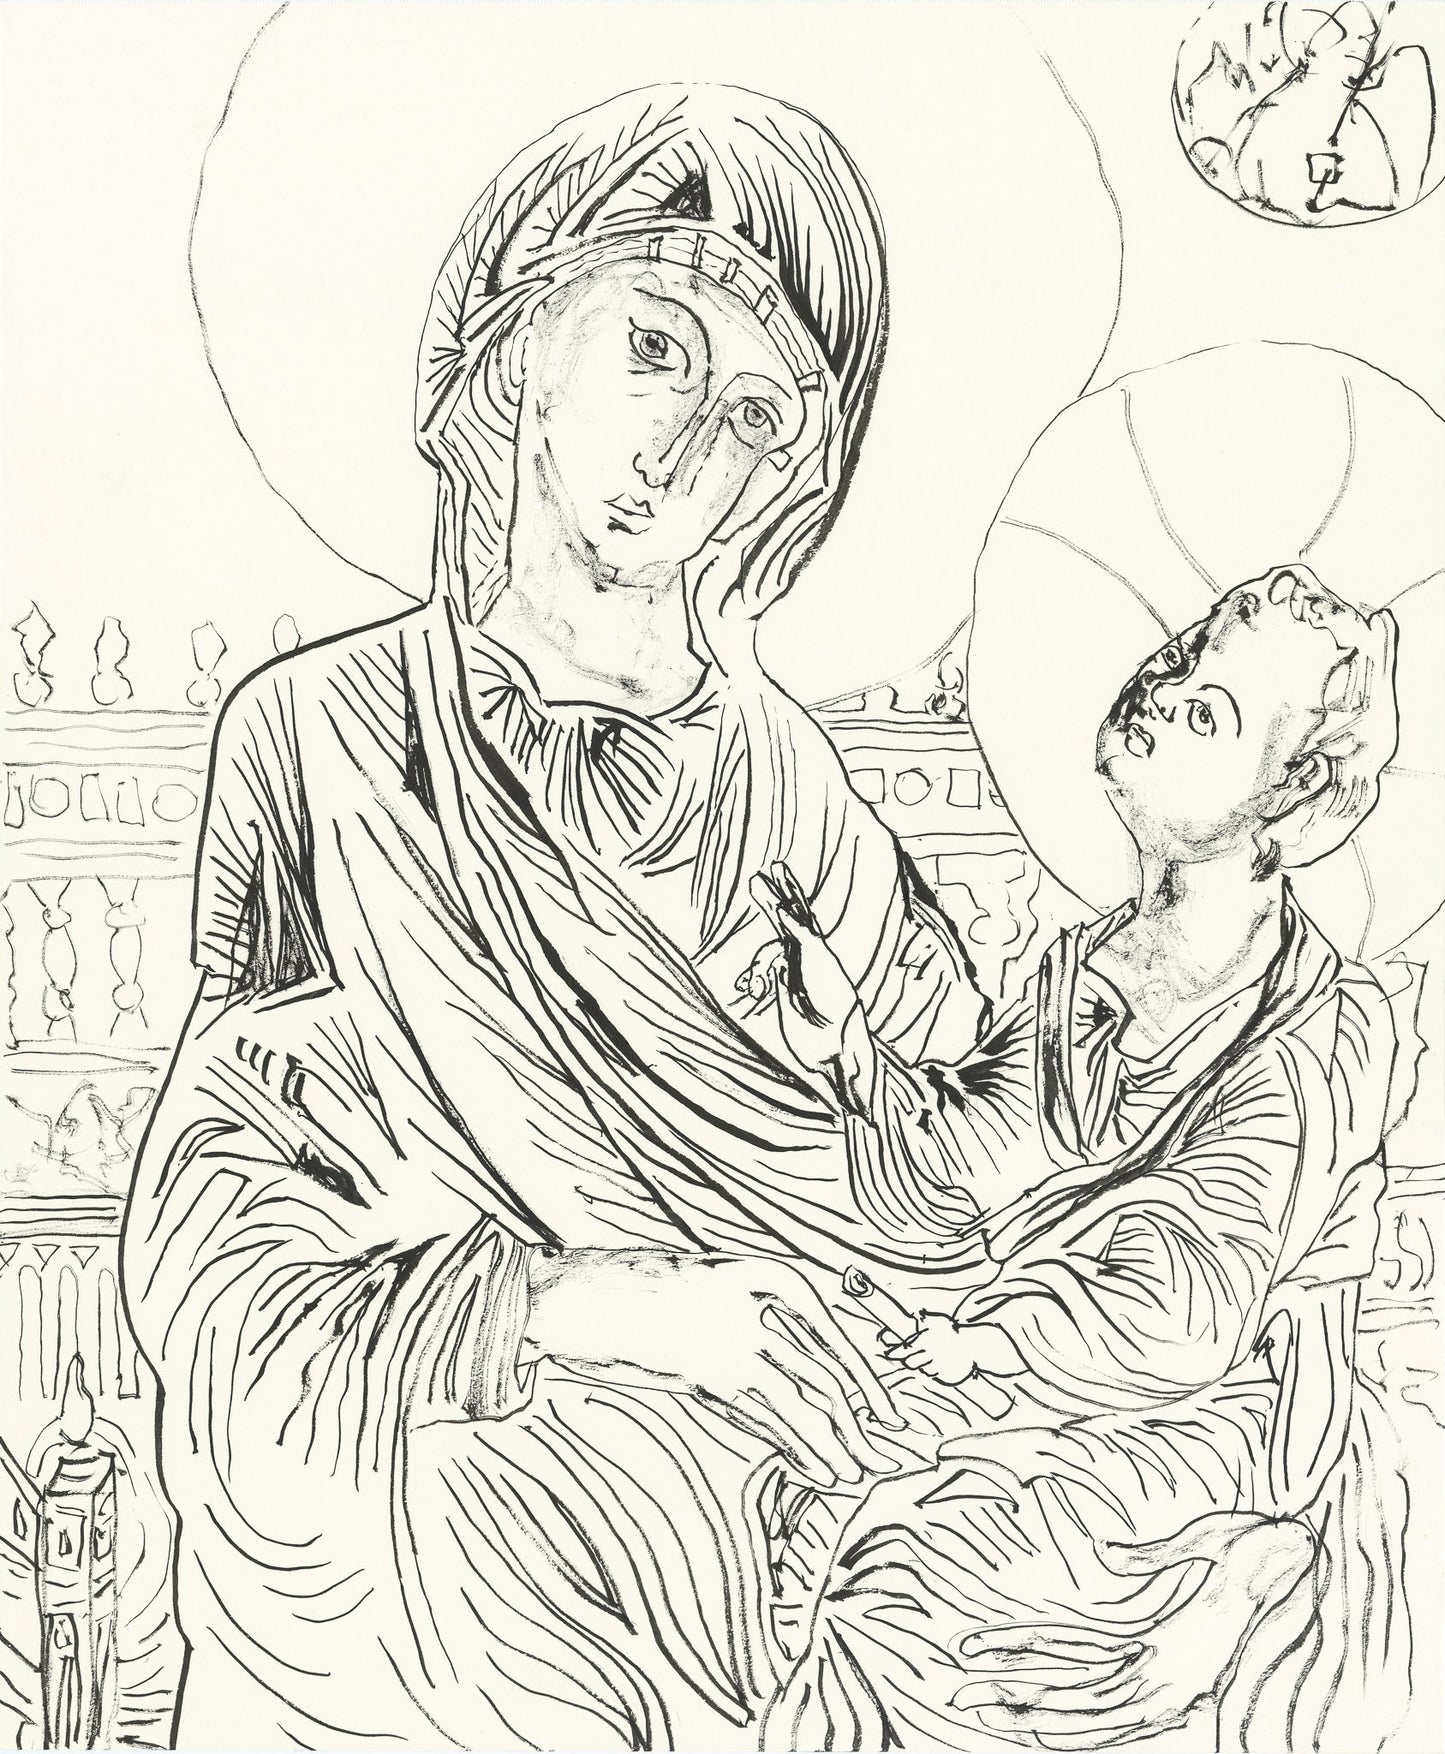 After Byzantine Enthroned Madonna and Child (c. 1250/1275)